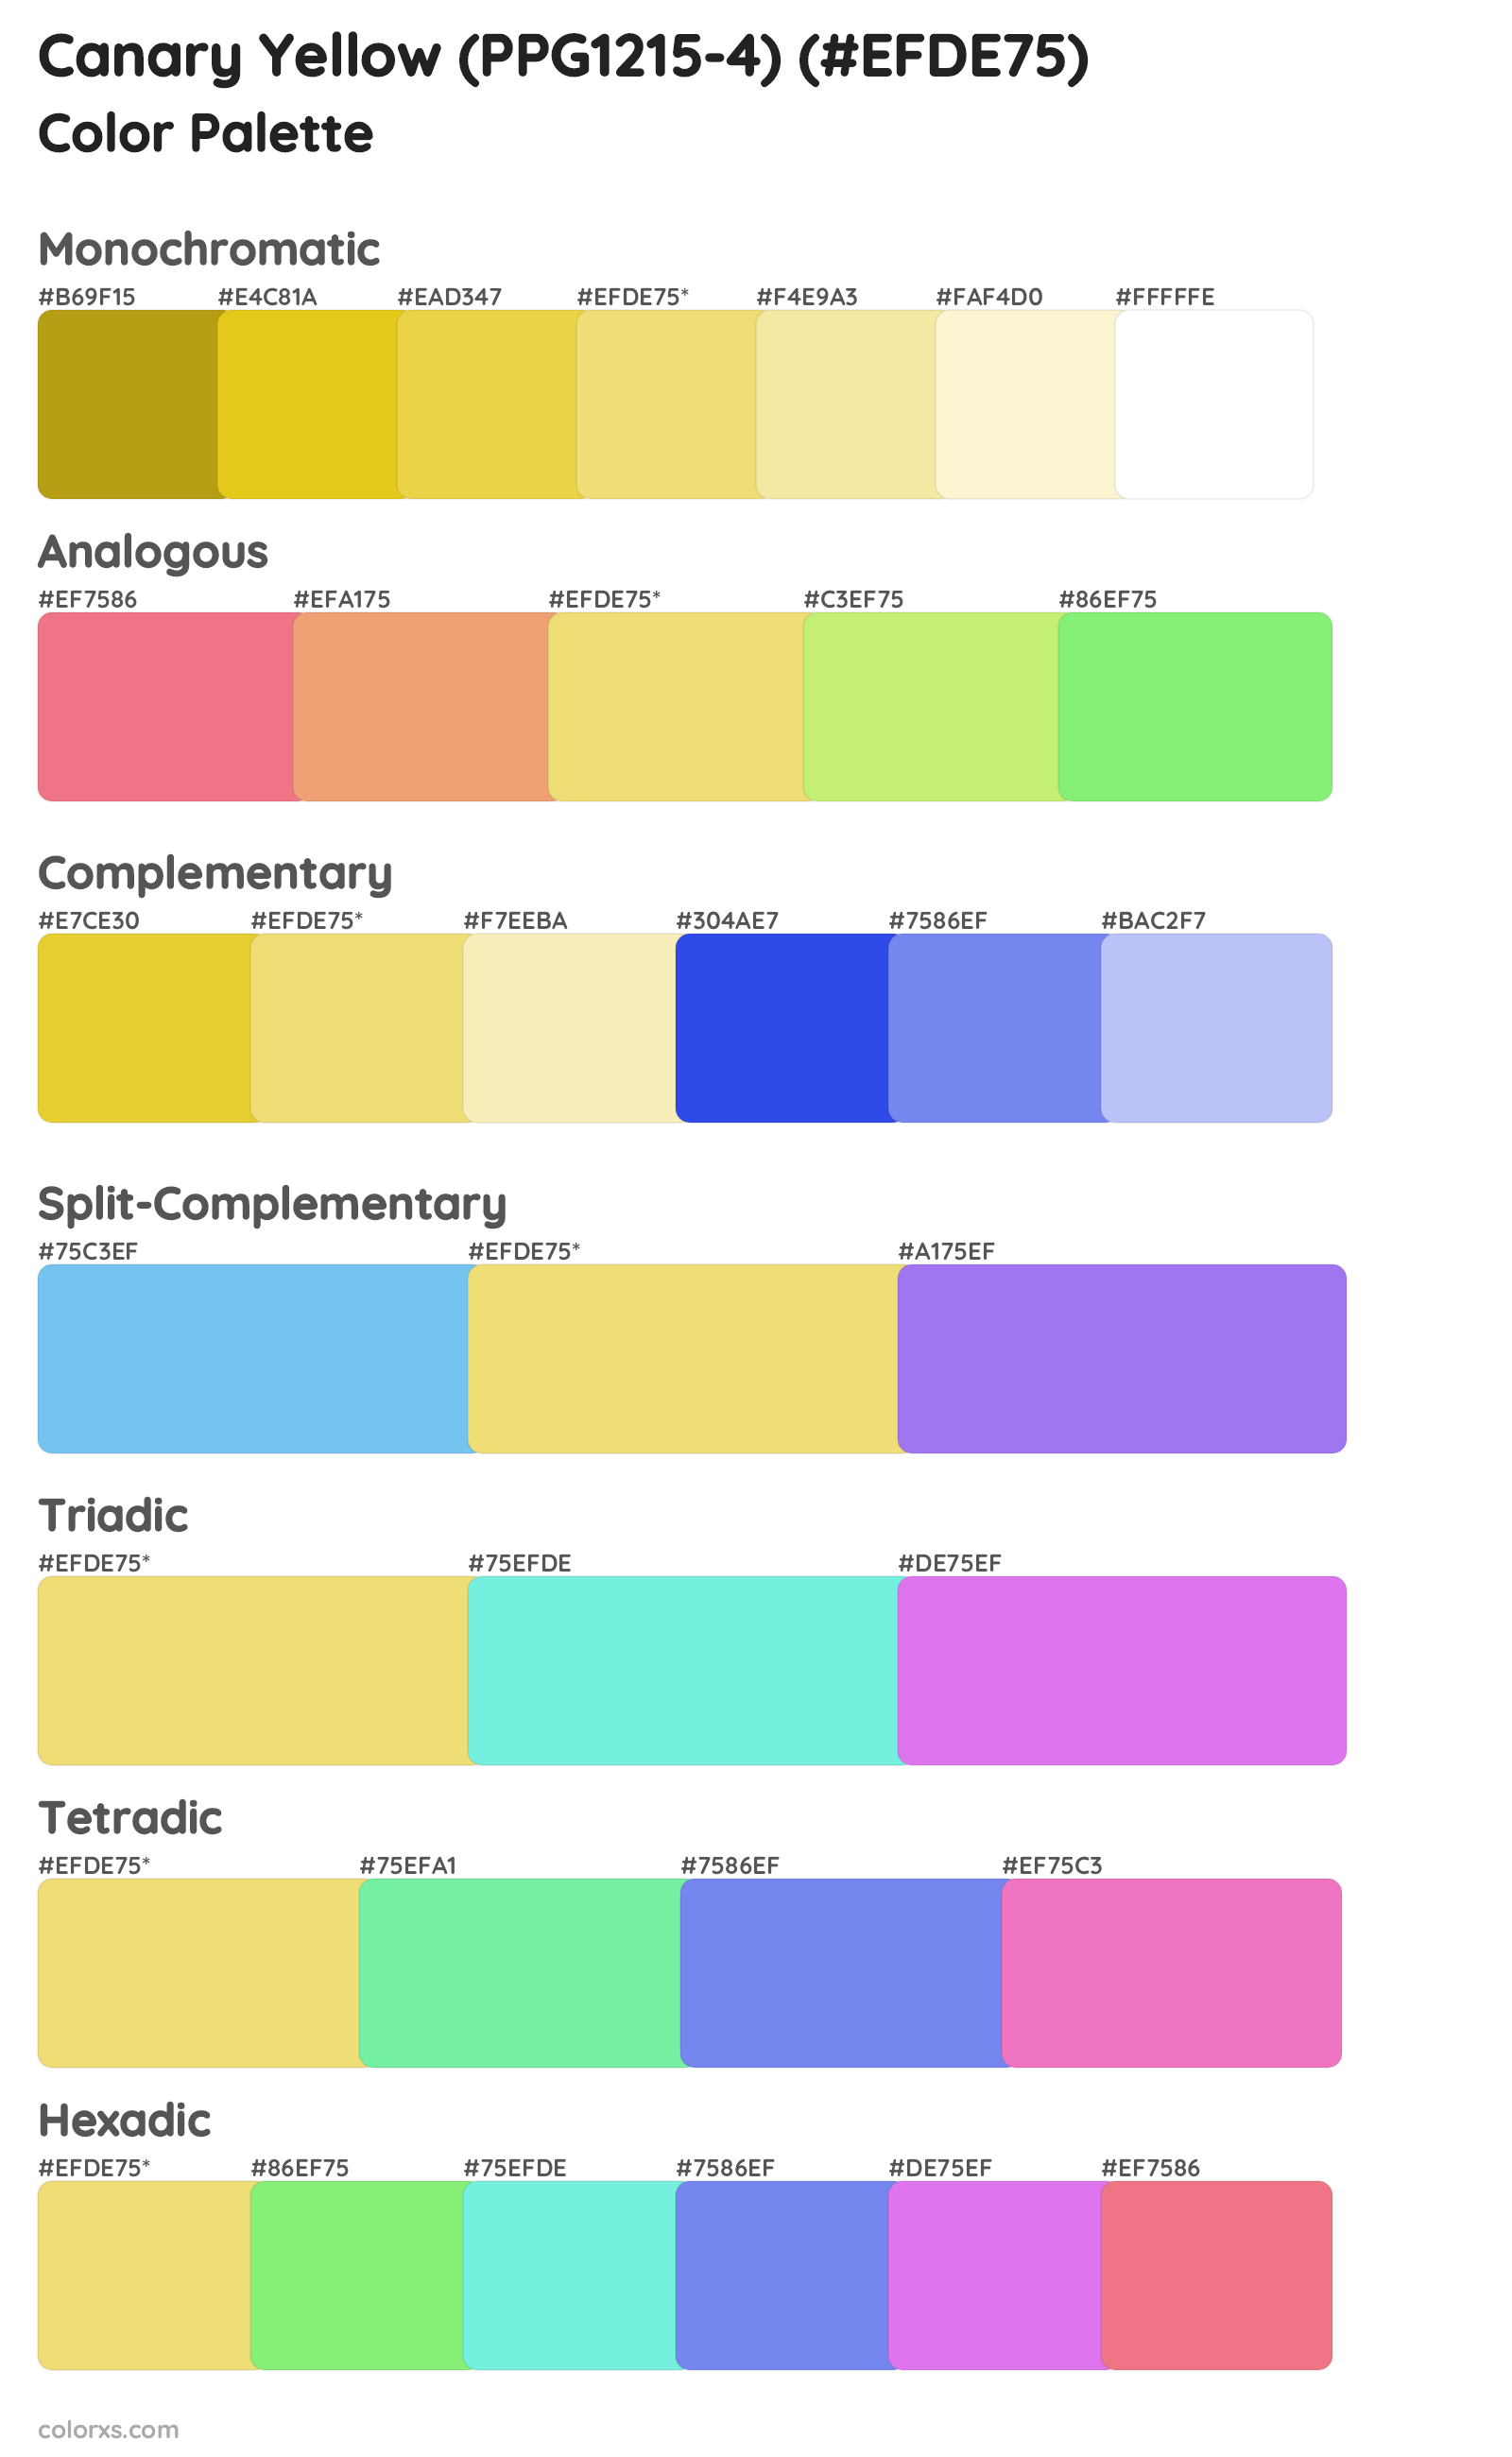 Canary Yellow (PPG1215-4) Color Scheme Palettes